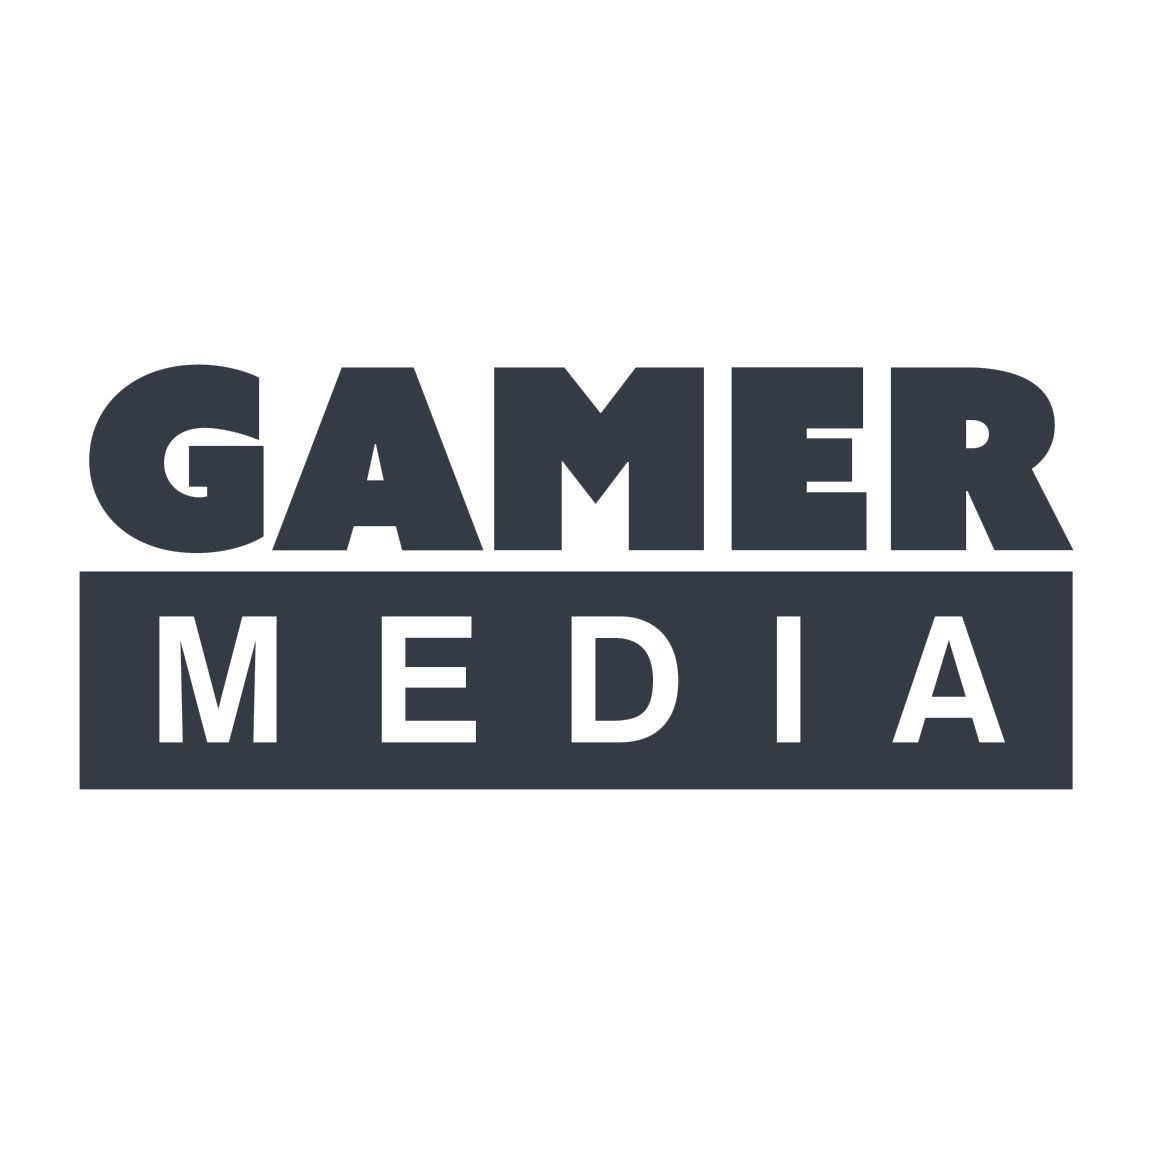 Gamer Media is one of the leading games media ad networking agency. For publisher services or other inquiries please contact contact@gamermedia.com.tr